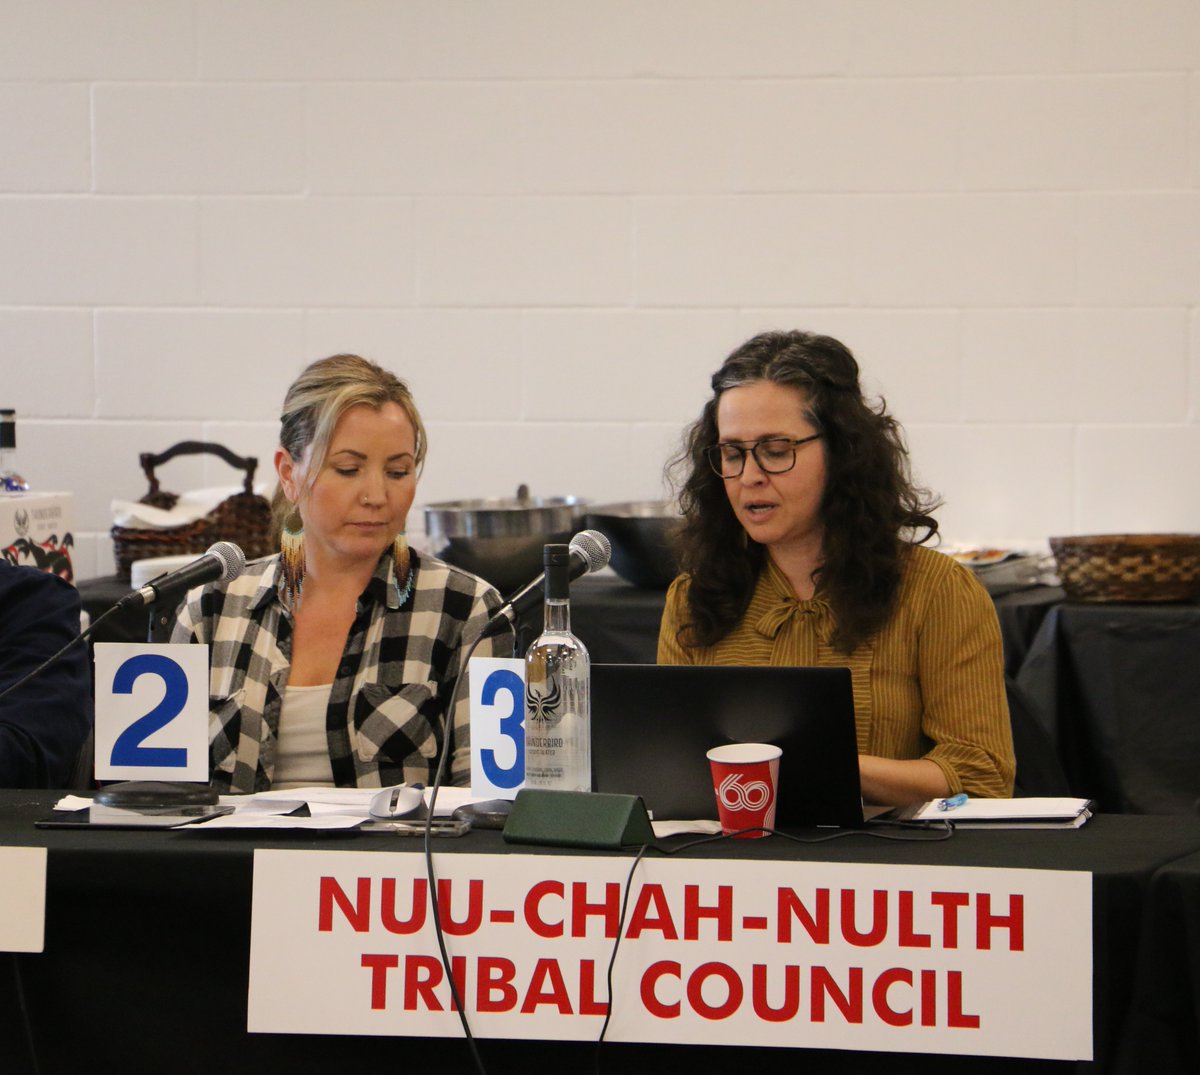 Today, on Day One of the Nuu-chah-nulth Council of Ha'wiih Forum on Fisheries, Uu-a-thluk's Dani & Irine solidified the final 2 outstanding aspects of the 2024-2029 Strategic Plan. Our 5-year plan will focus on Access, Management, Capacity Building & Organizational Development.